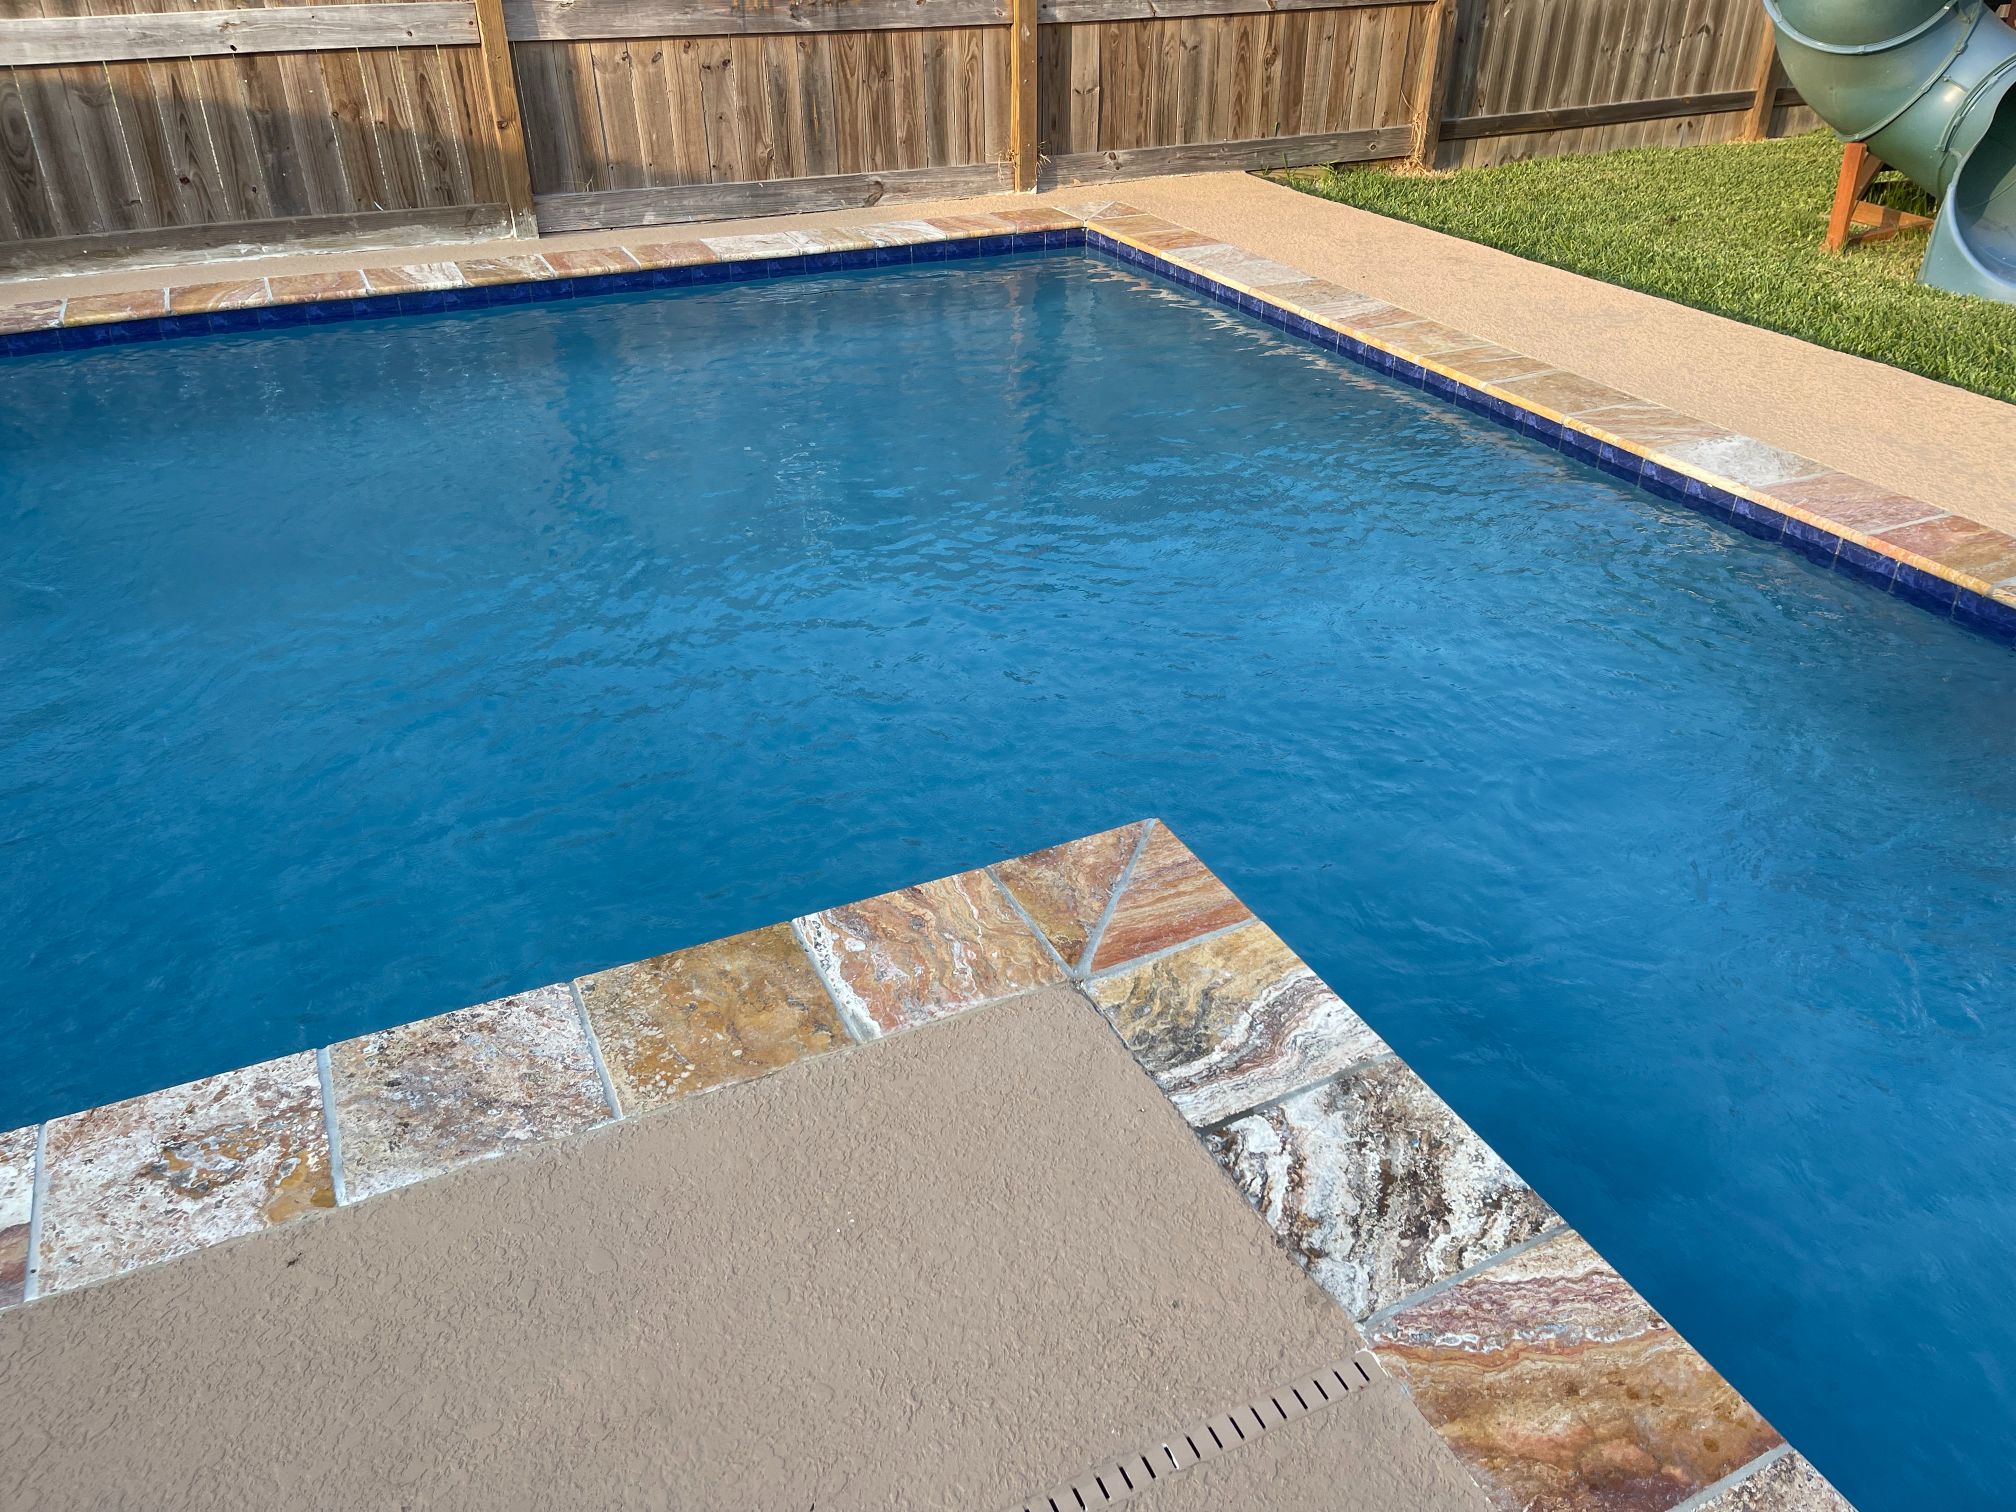 Gallery Images: Majestic Pools & Spas Pool Contractors